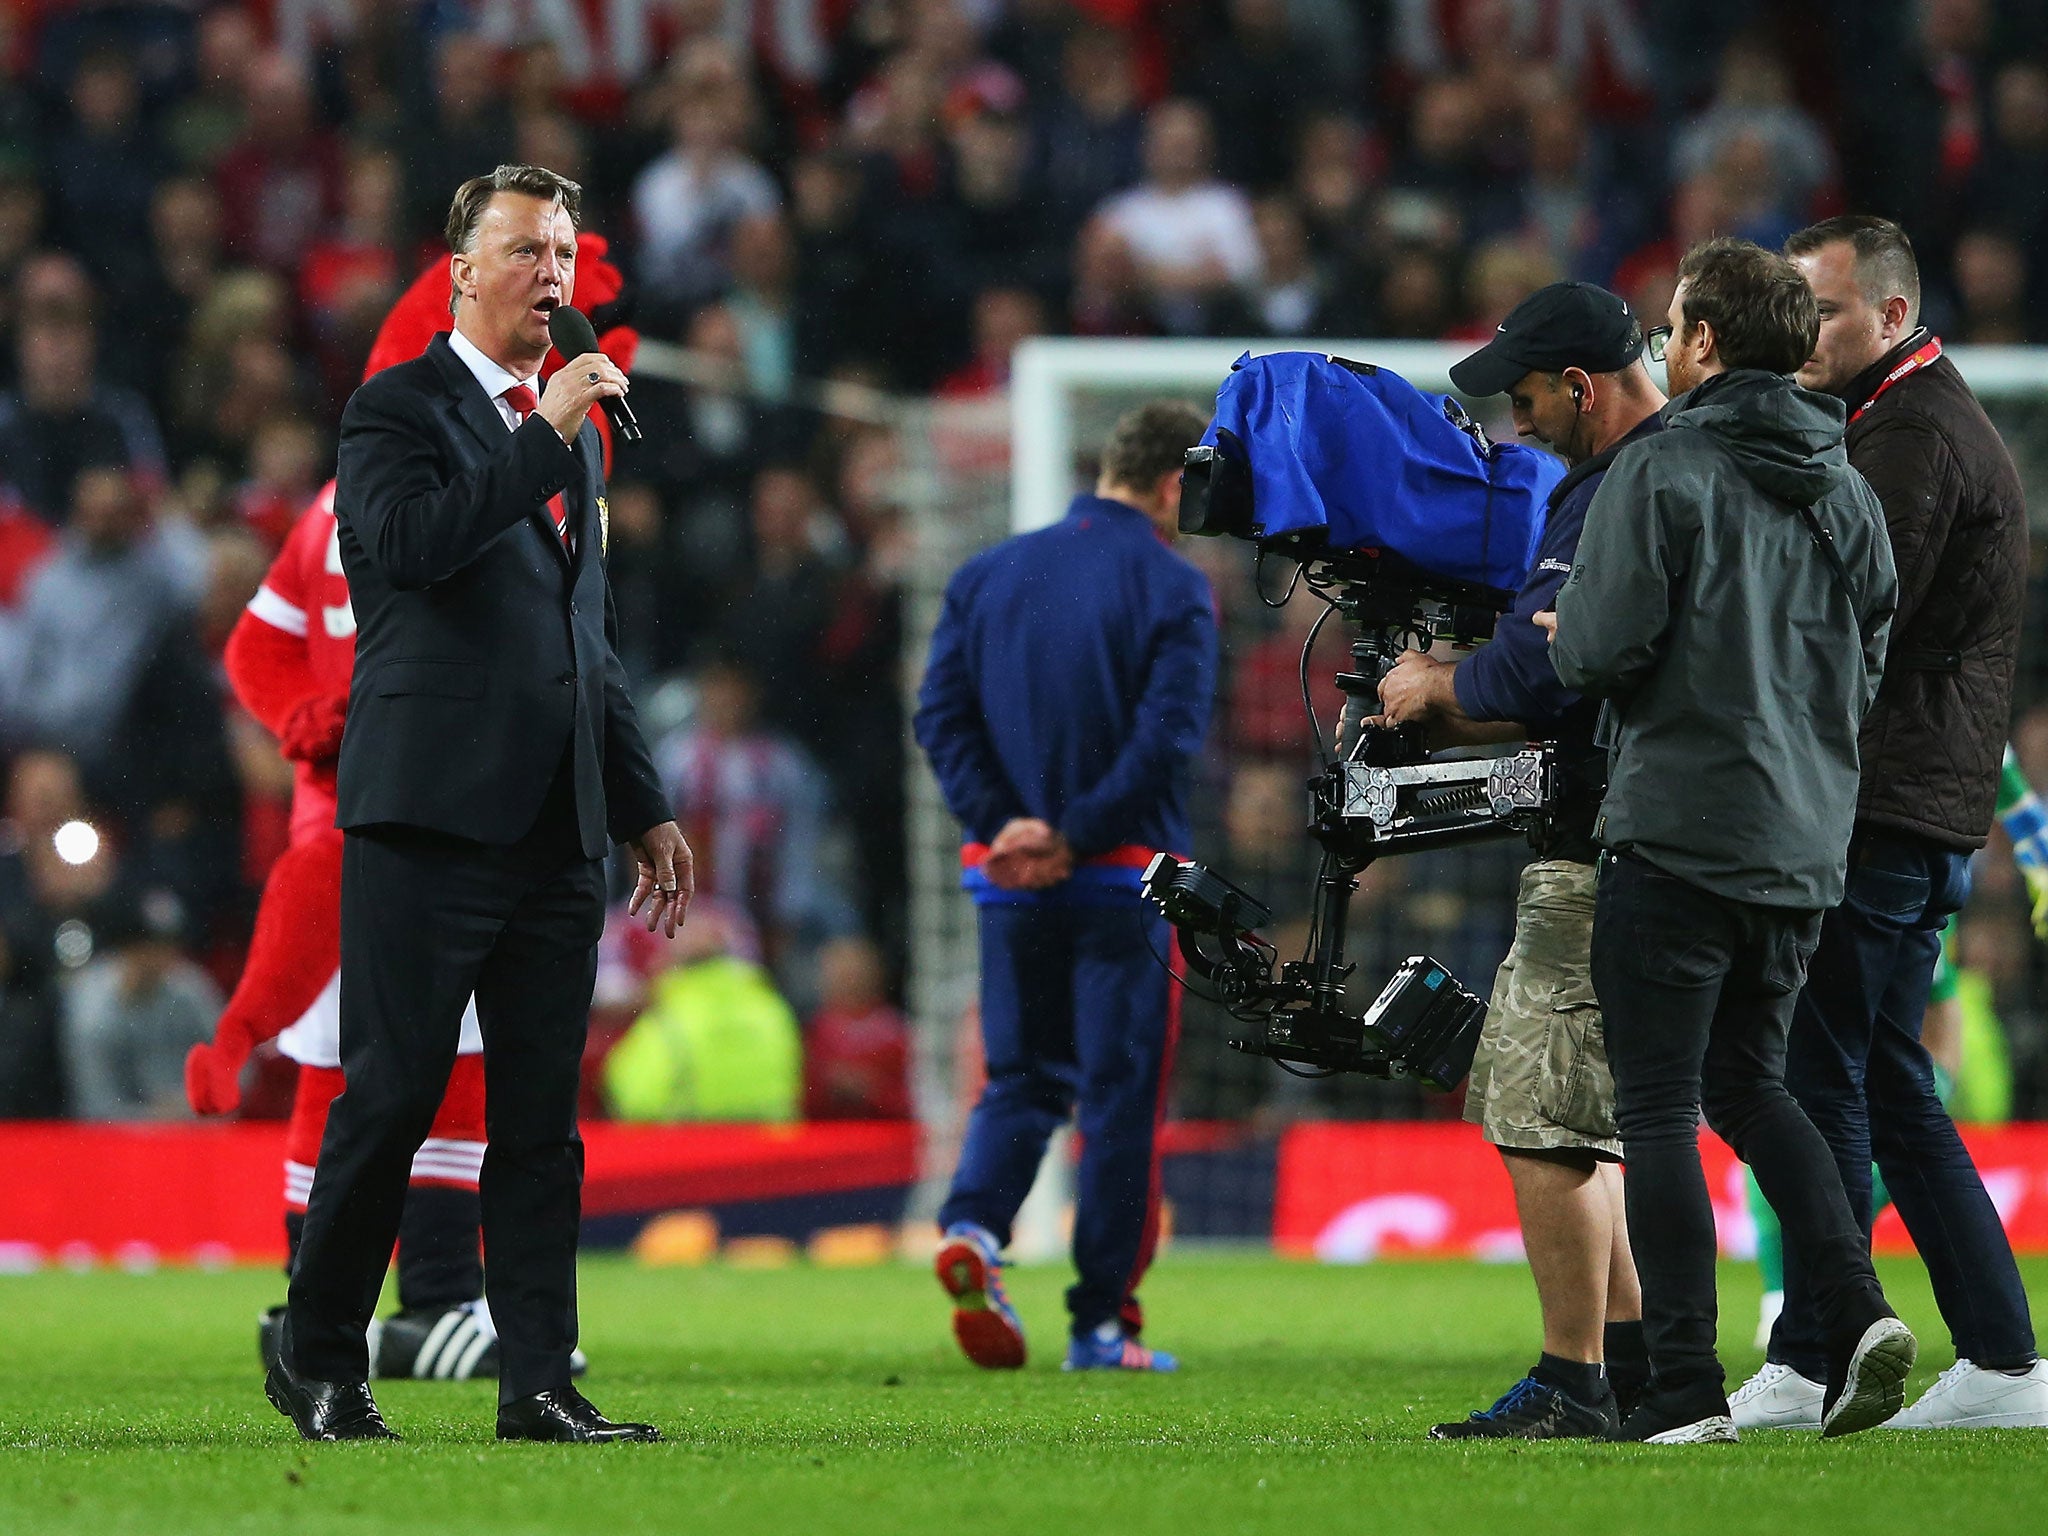 Louis van Gaal addresses the Old Trafford crowd after Manchester United's final game of the season